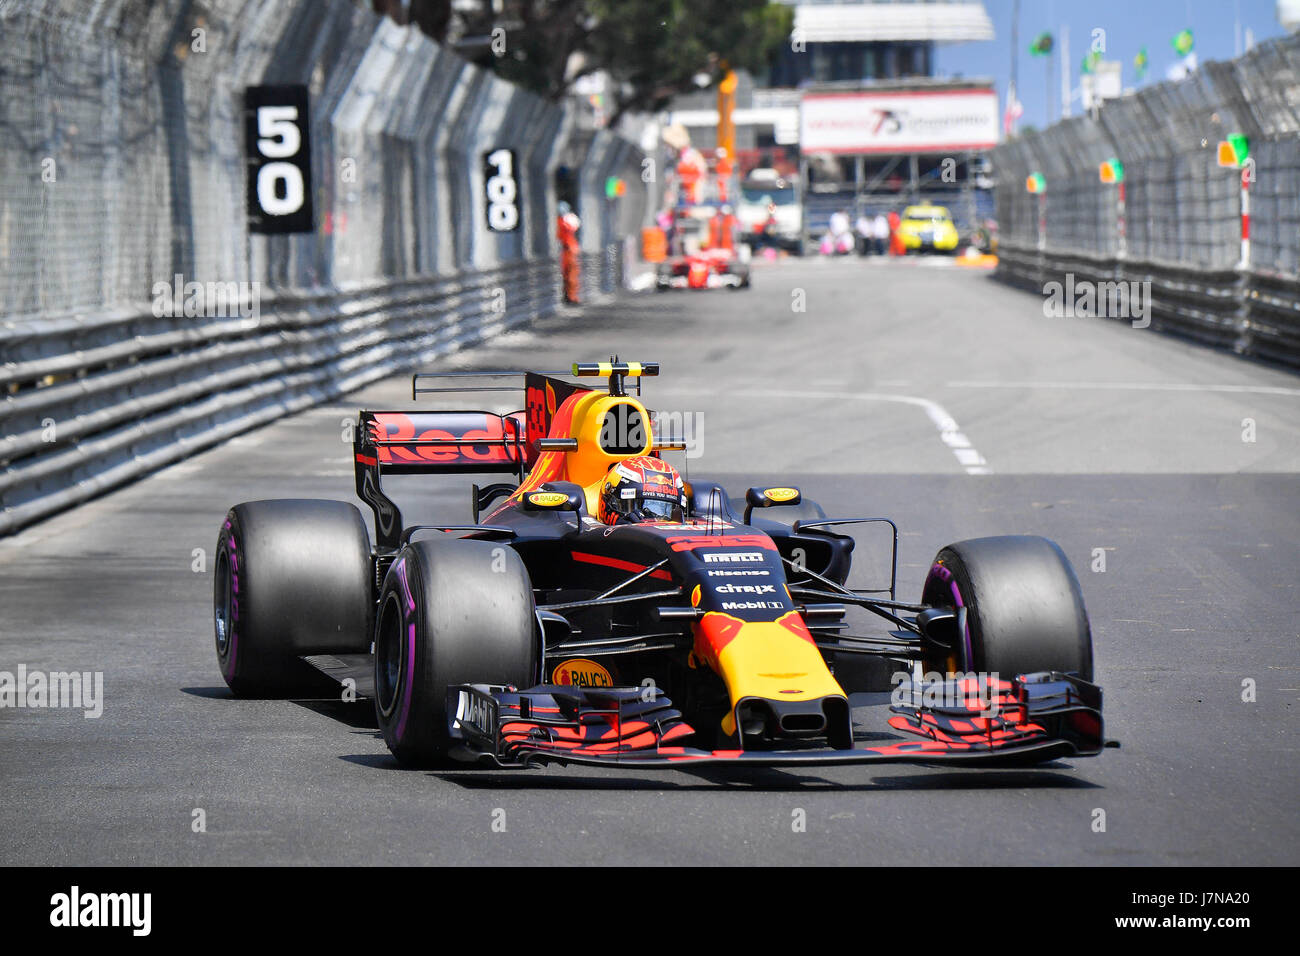 Monaco. 25th May, 2017. Bull Racing Tag Heuer Belgian-Dutch driver Max Verstappen competes during the second practice session of the Formula One Monaco Grand Prix in Monaco, on 25, 2017.